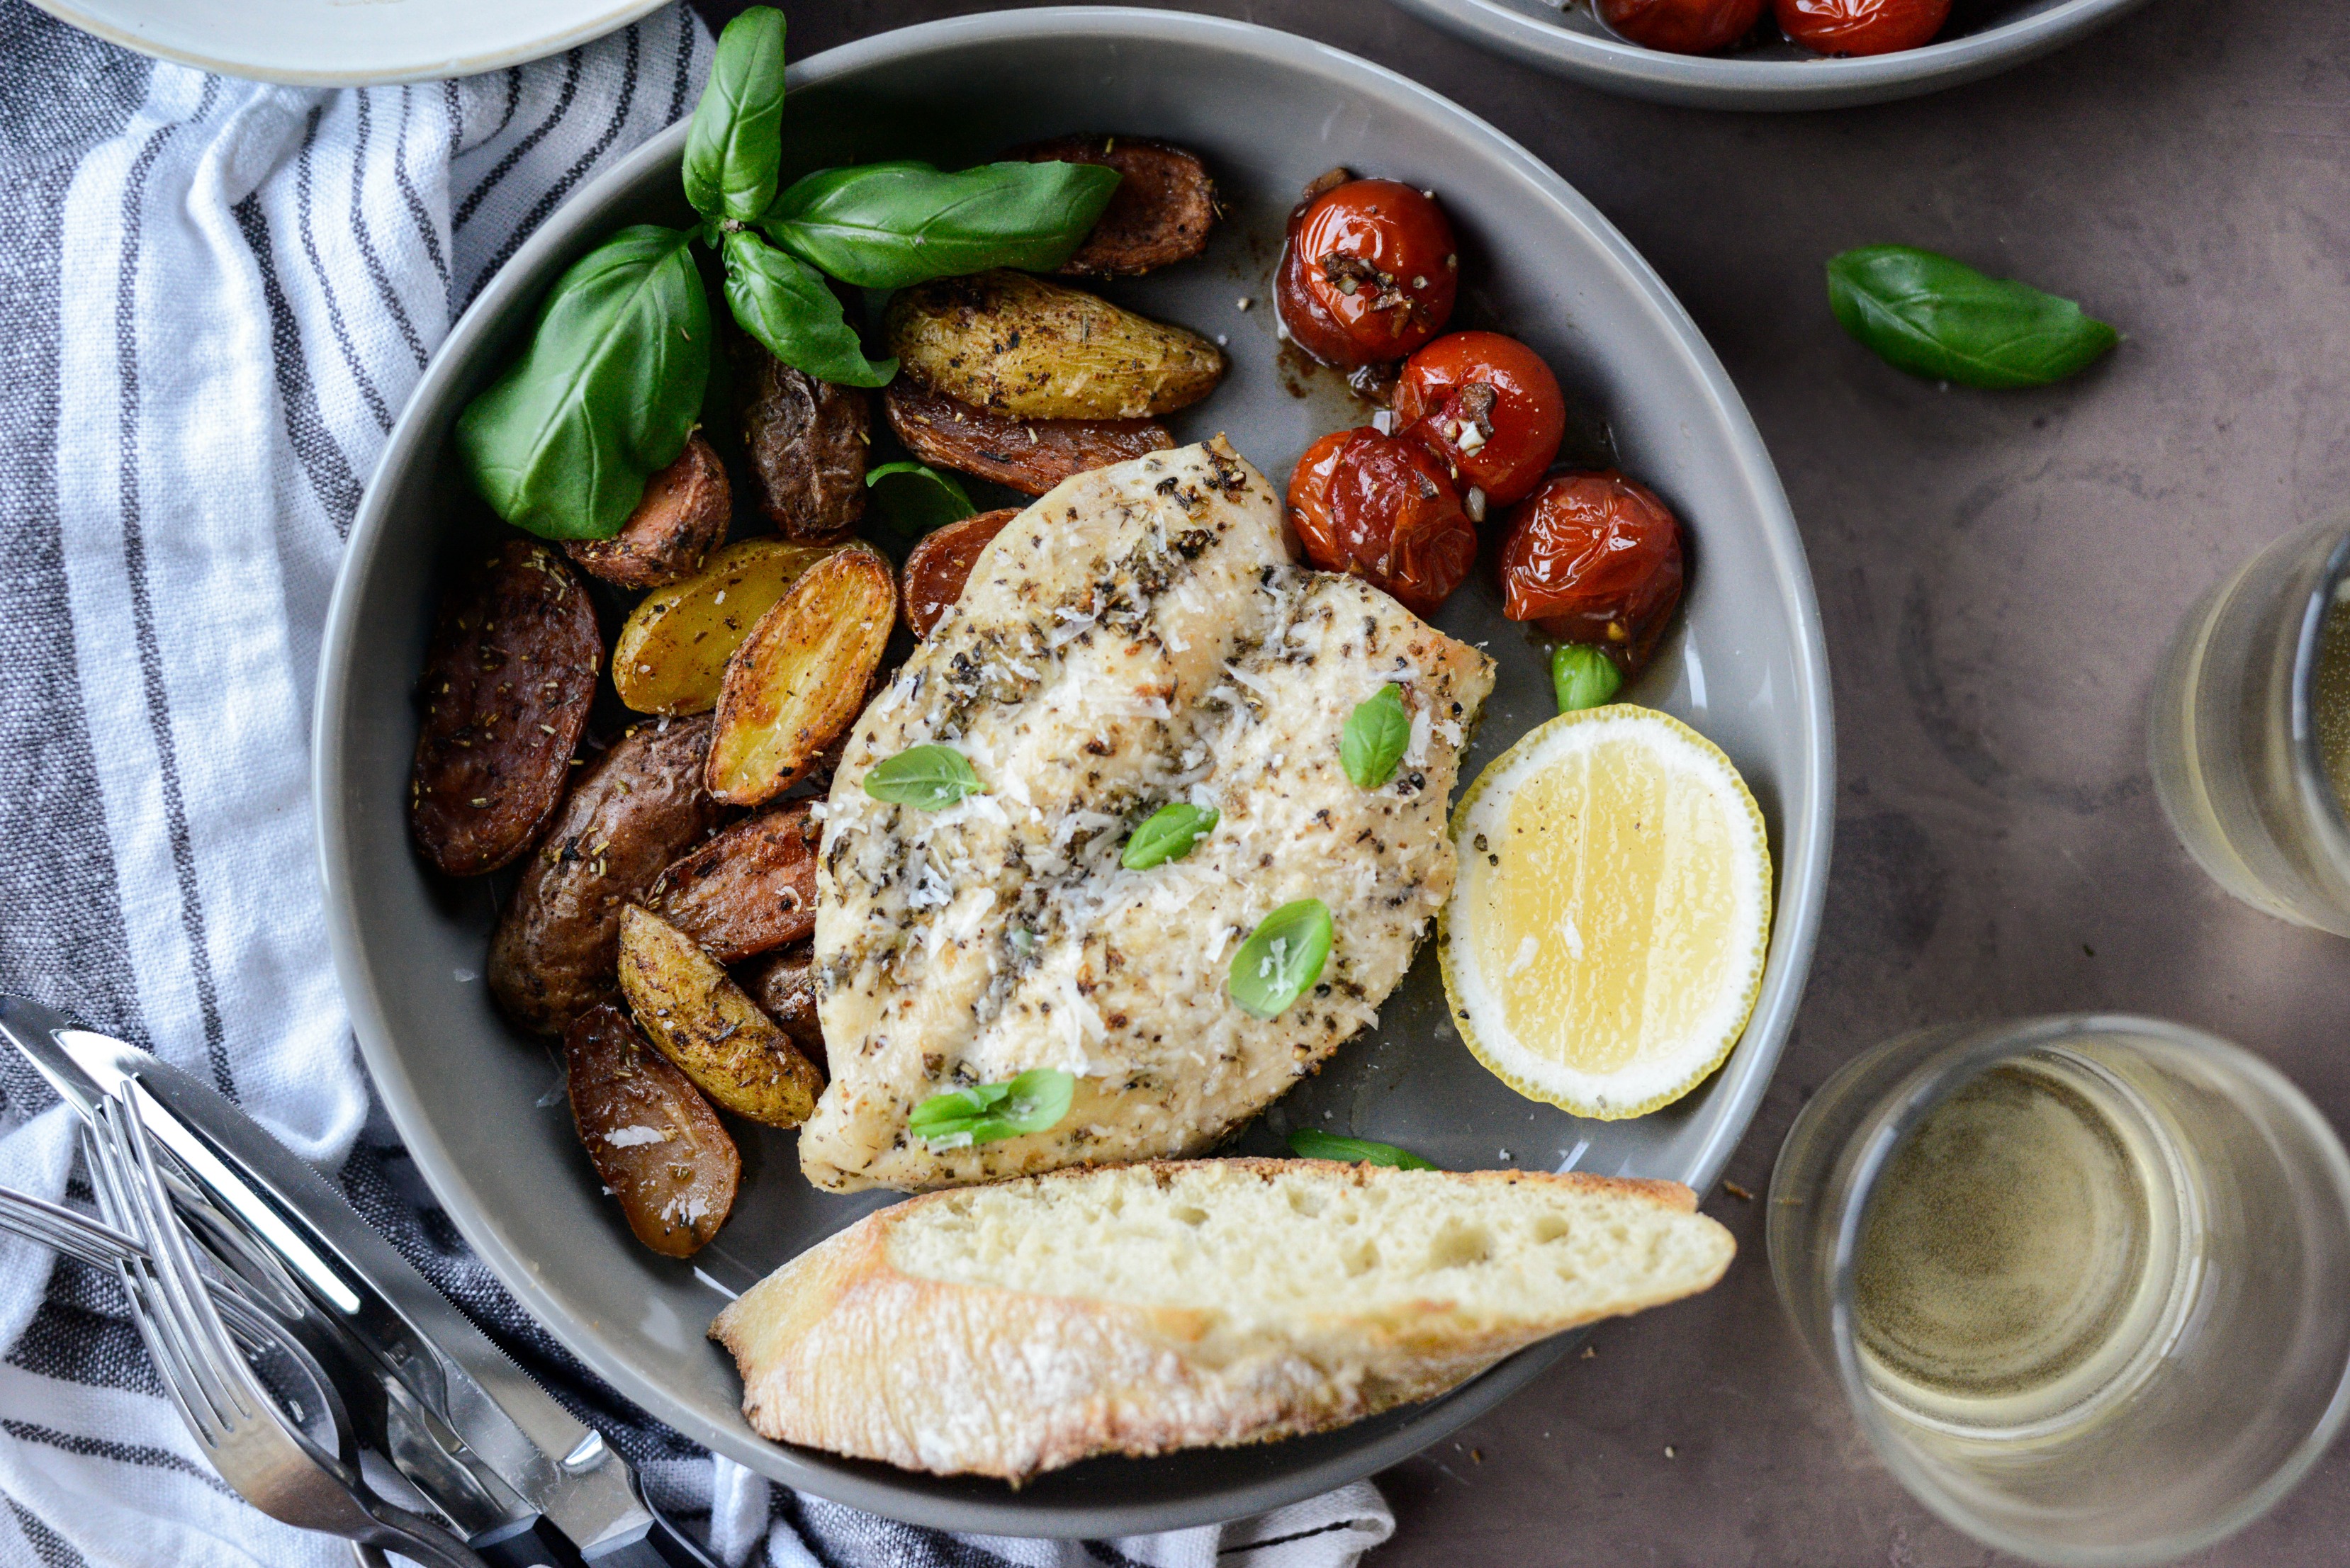 https://www.simplyscratch.com/wp-content/uploads/2018/10/Tuscan-Chicken-and-Potato-Sheet-Pan-Dinner-with-Balsamic-Burst-Tomatoes-l-SimplyScratch.com-20.jpg